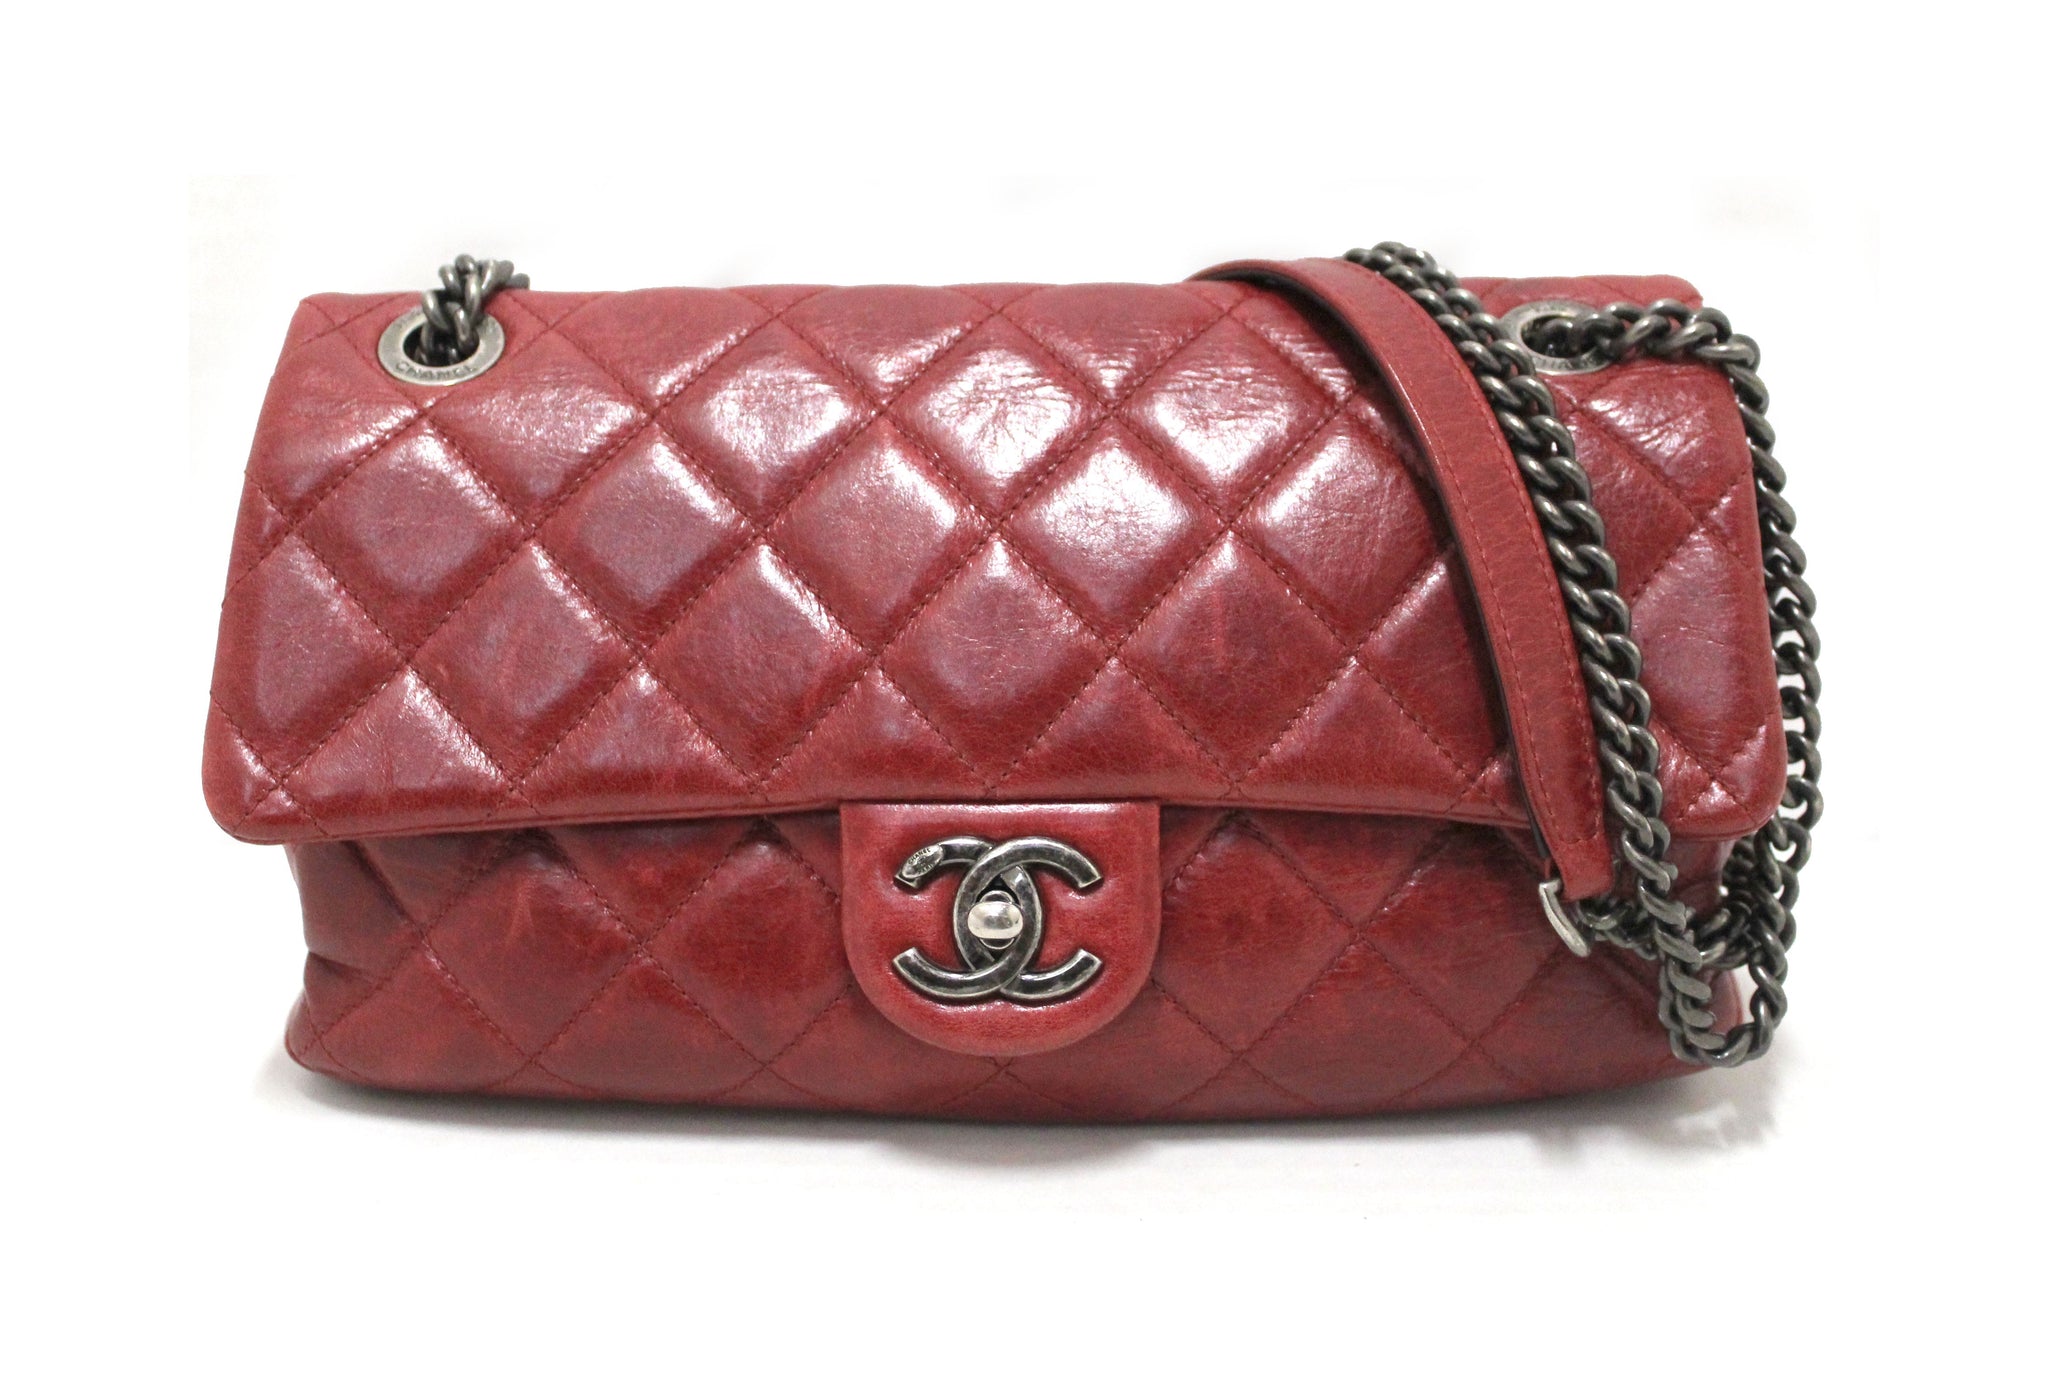 Chanel Red Aged Calfskin Leather Quilted Medium Easy Flap Shoulder